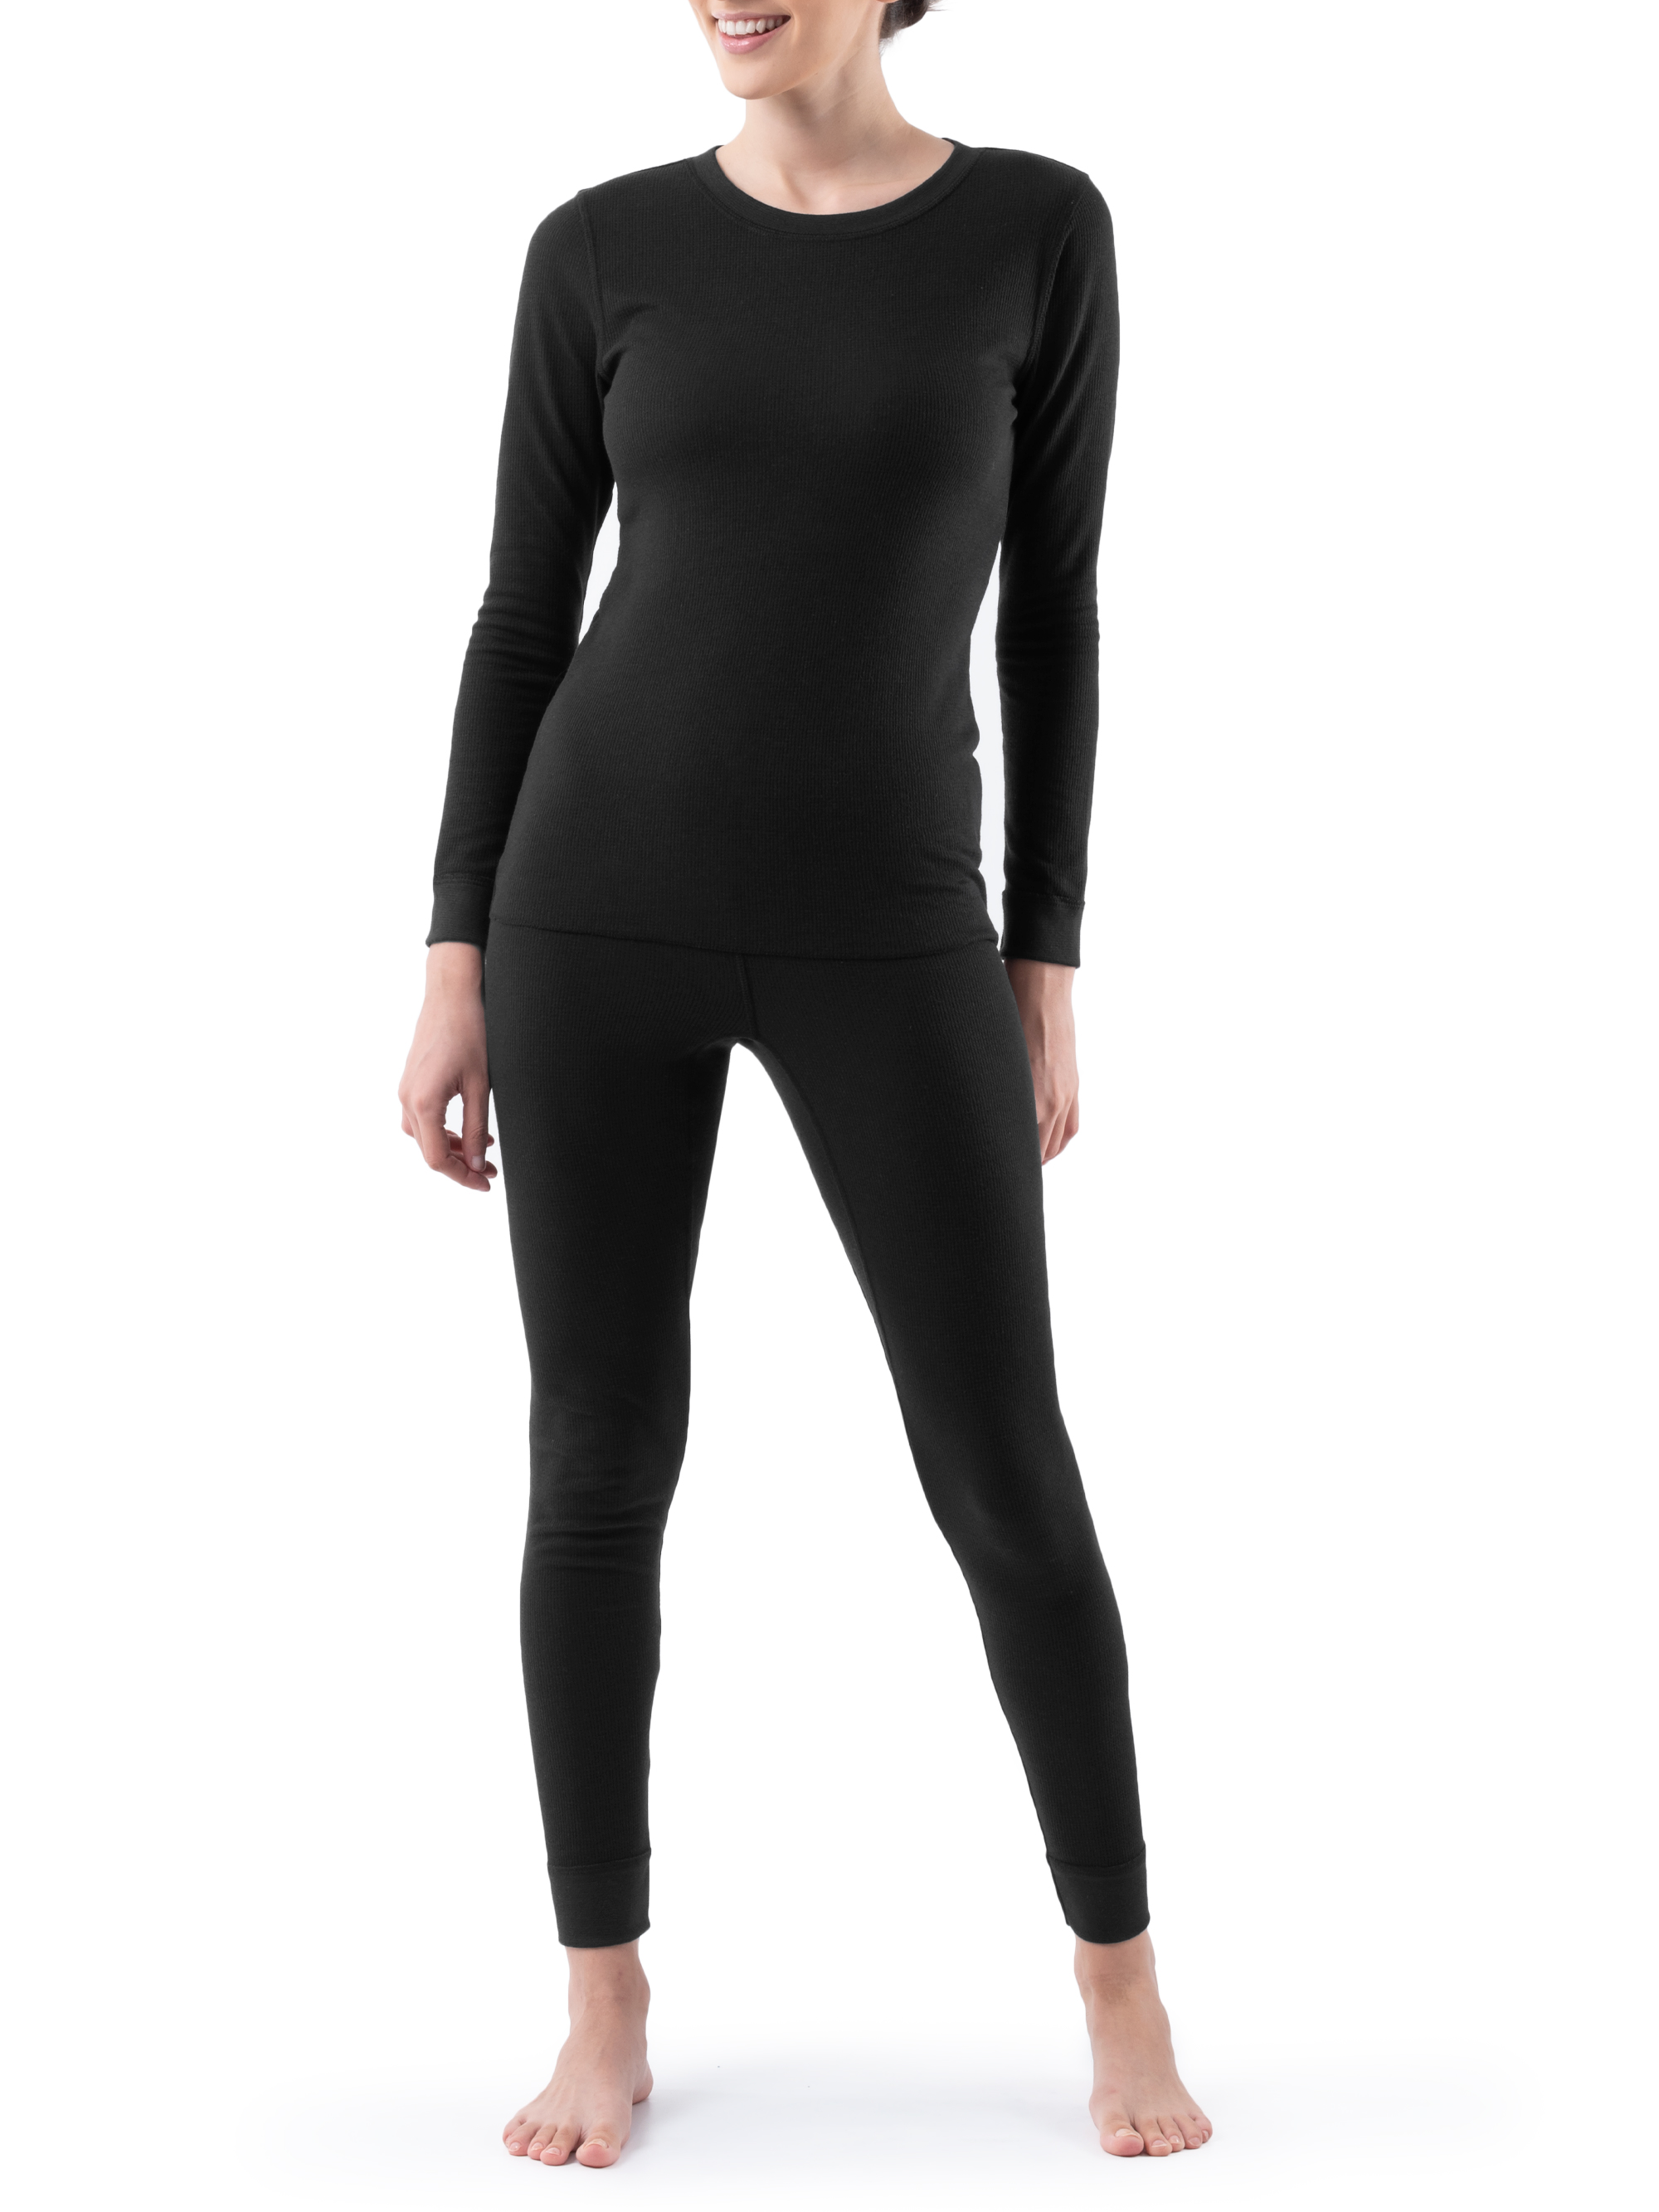 Fruit of the Loom Women's and Women's Plus Long Underwear Thermal Waffle Top and Bottom Set - image 1 of 14